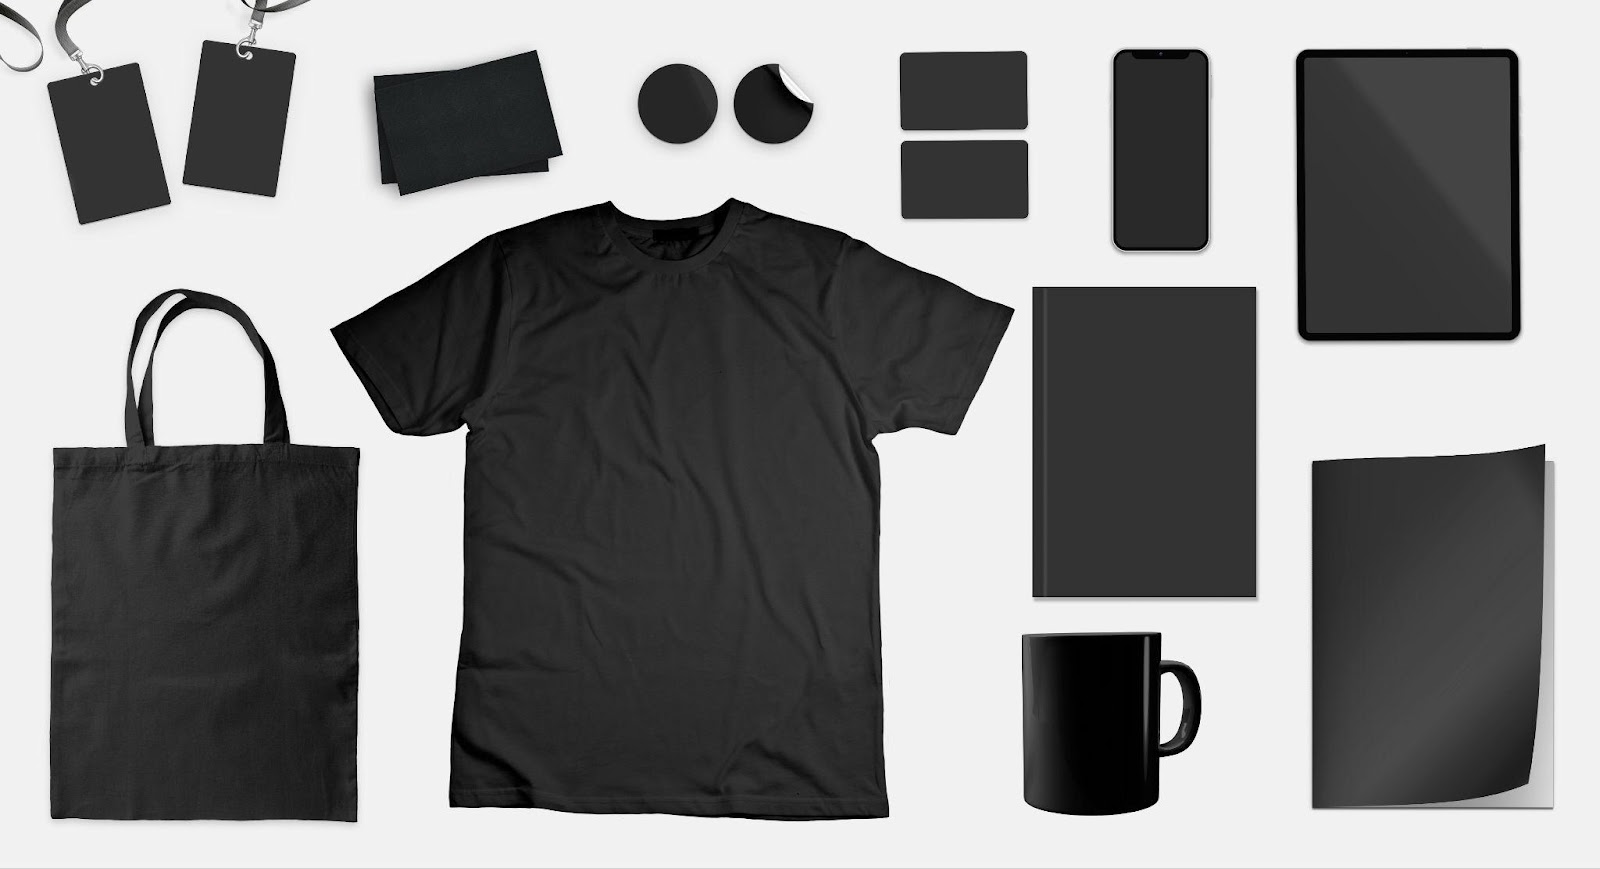 A collection of black, unbranded products, ready to be printed on demand.